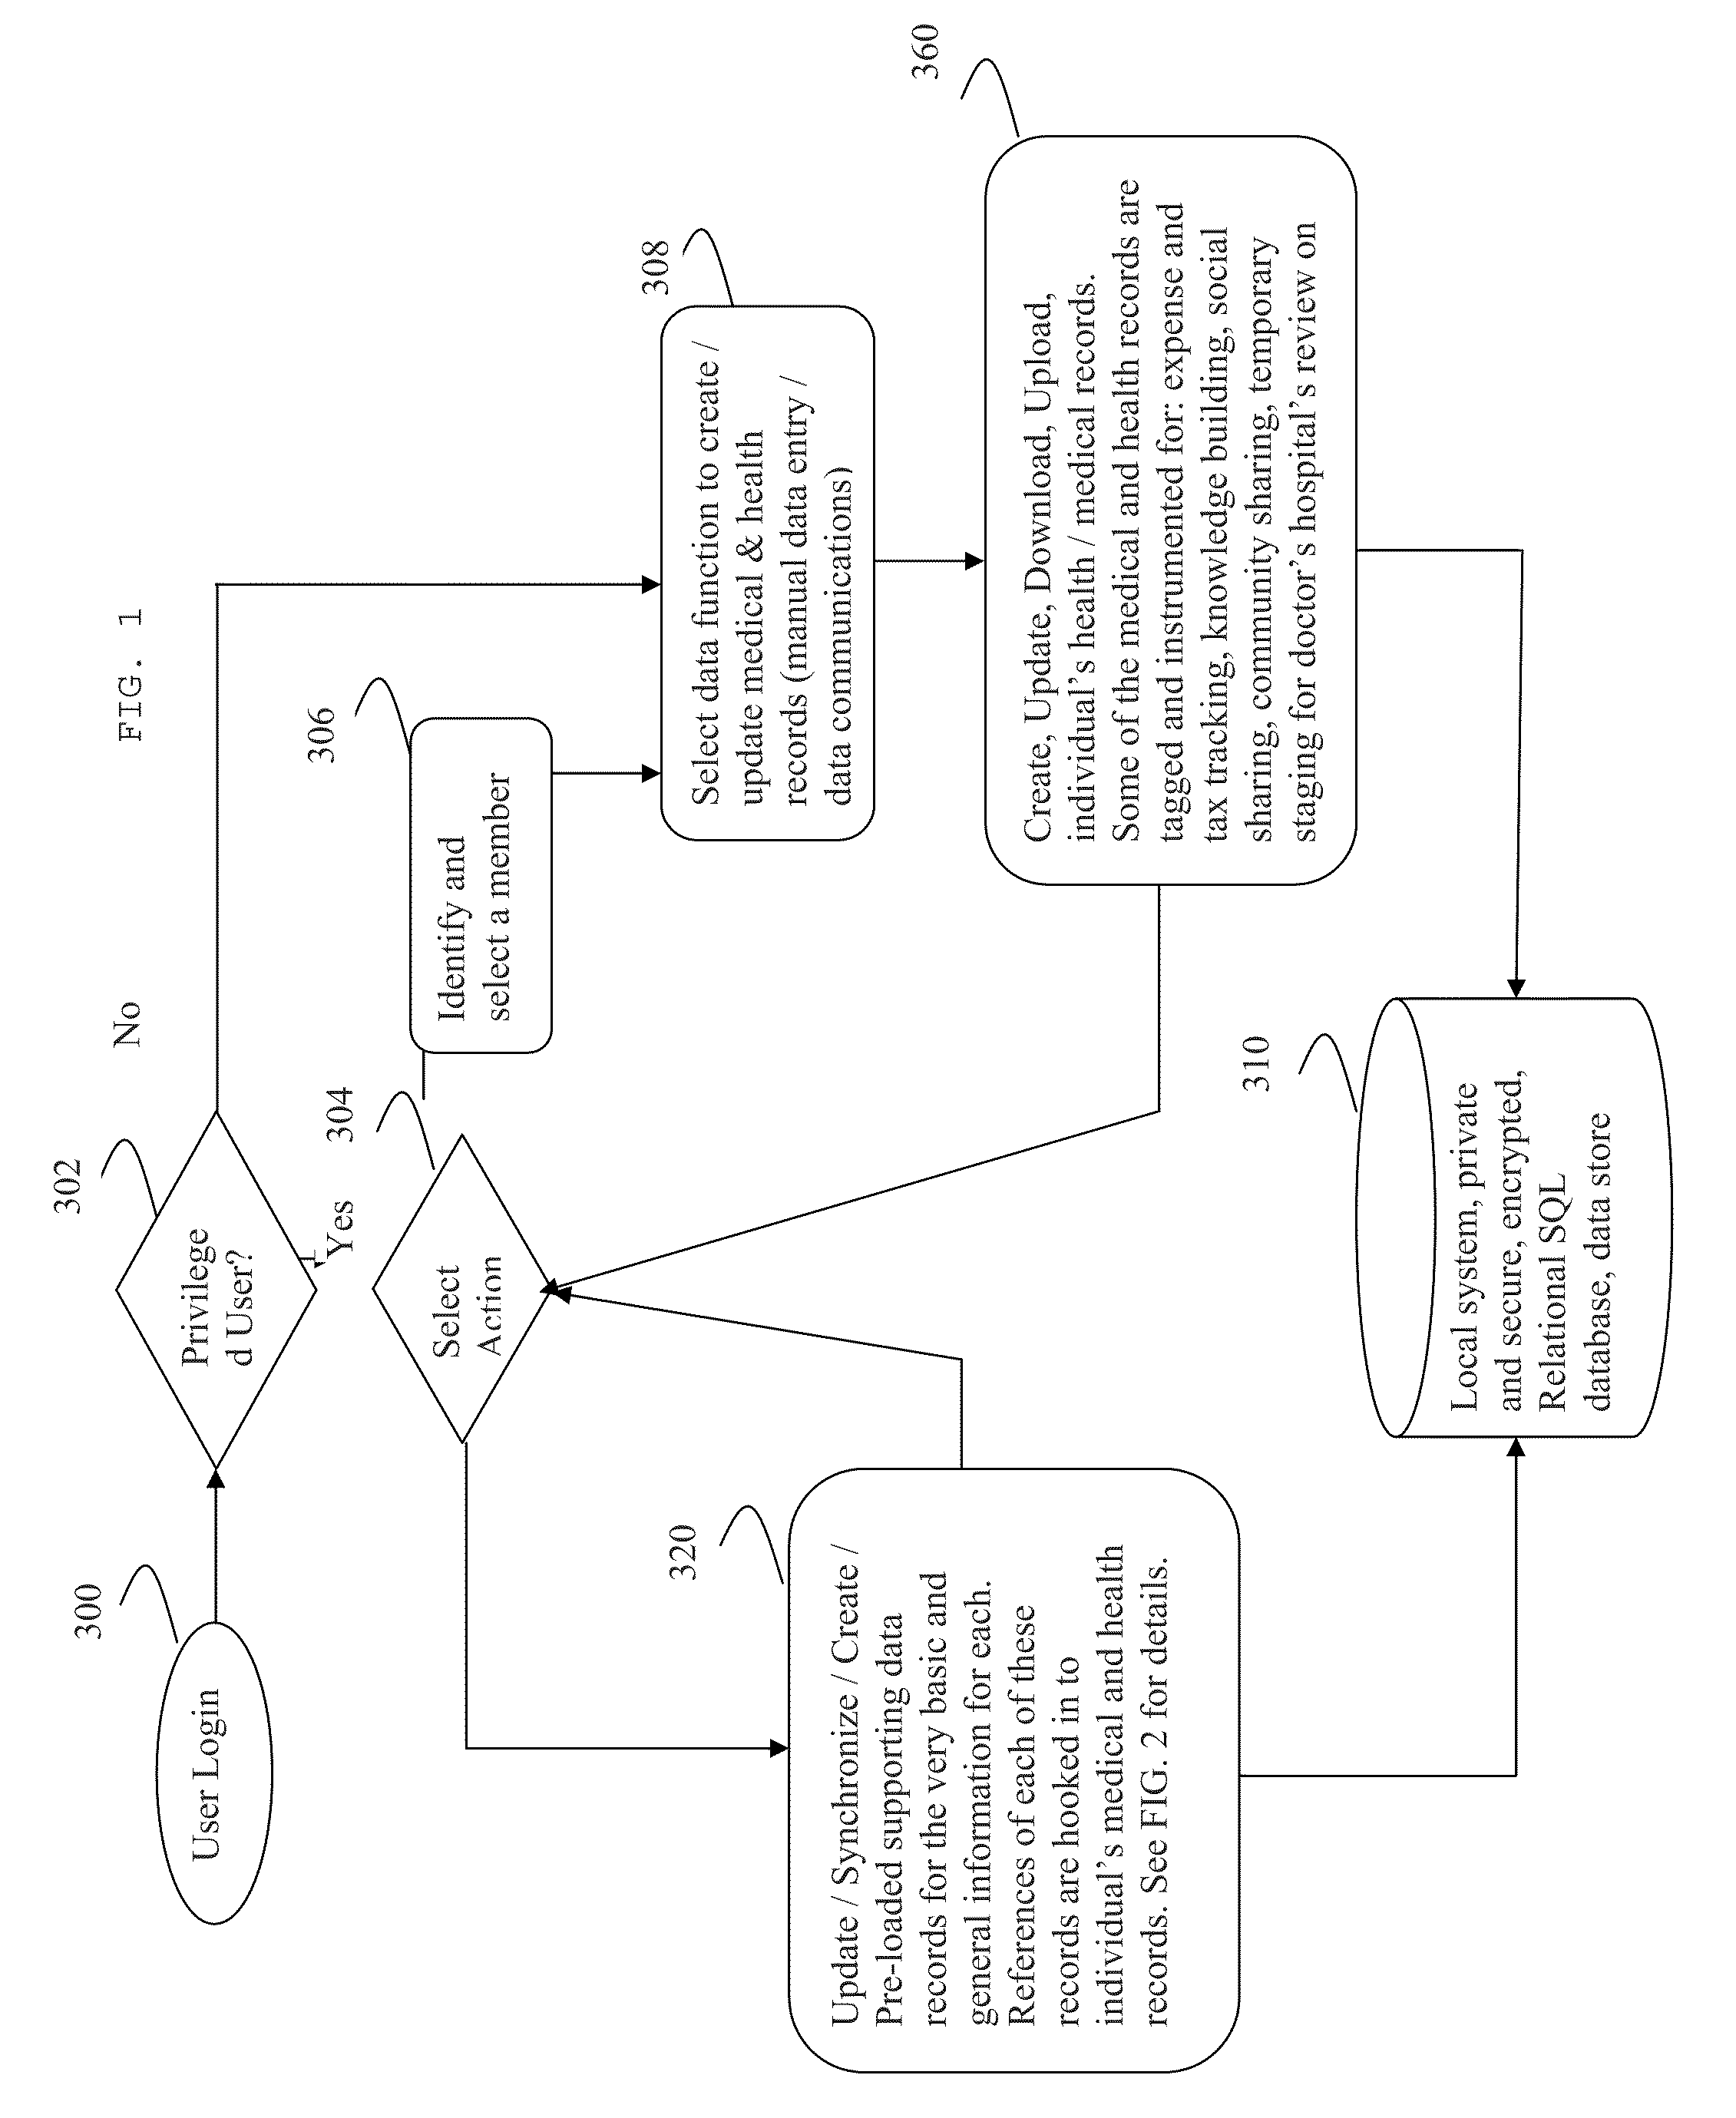 Method and system for healthcare information data storage